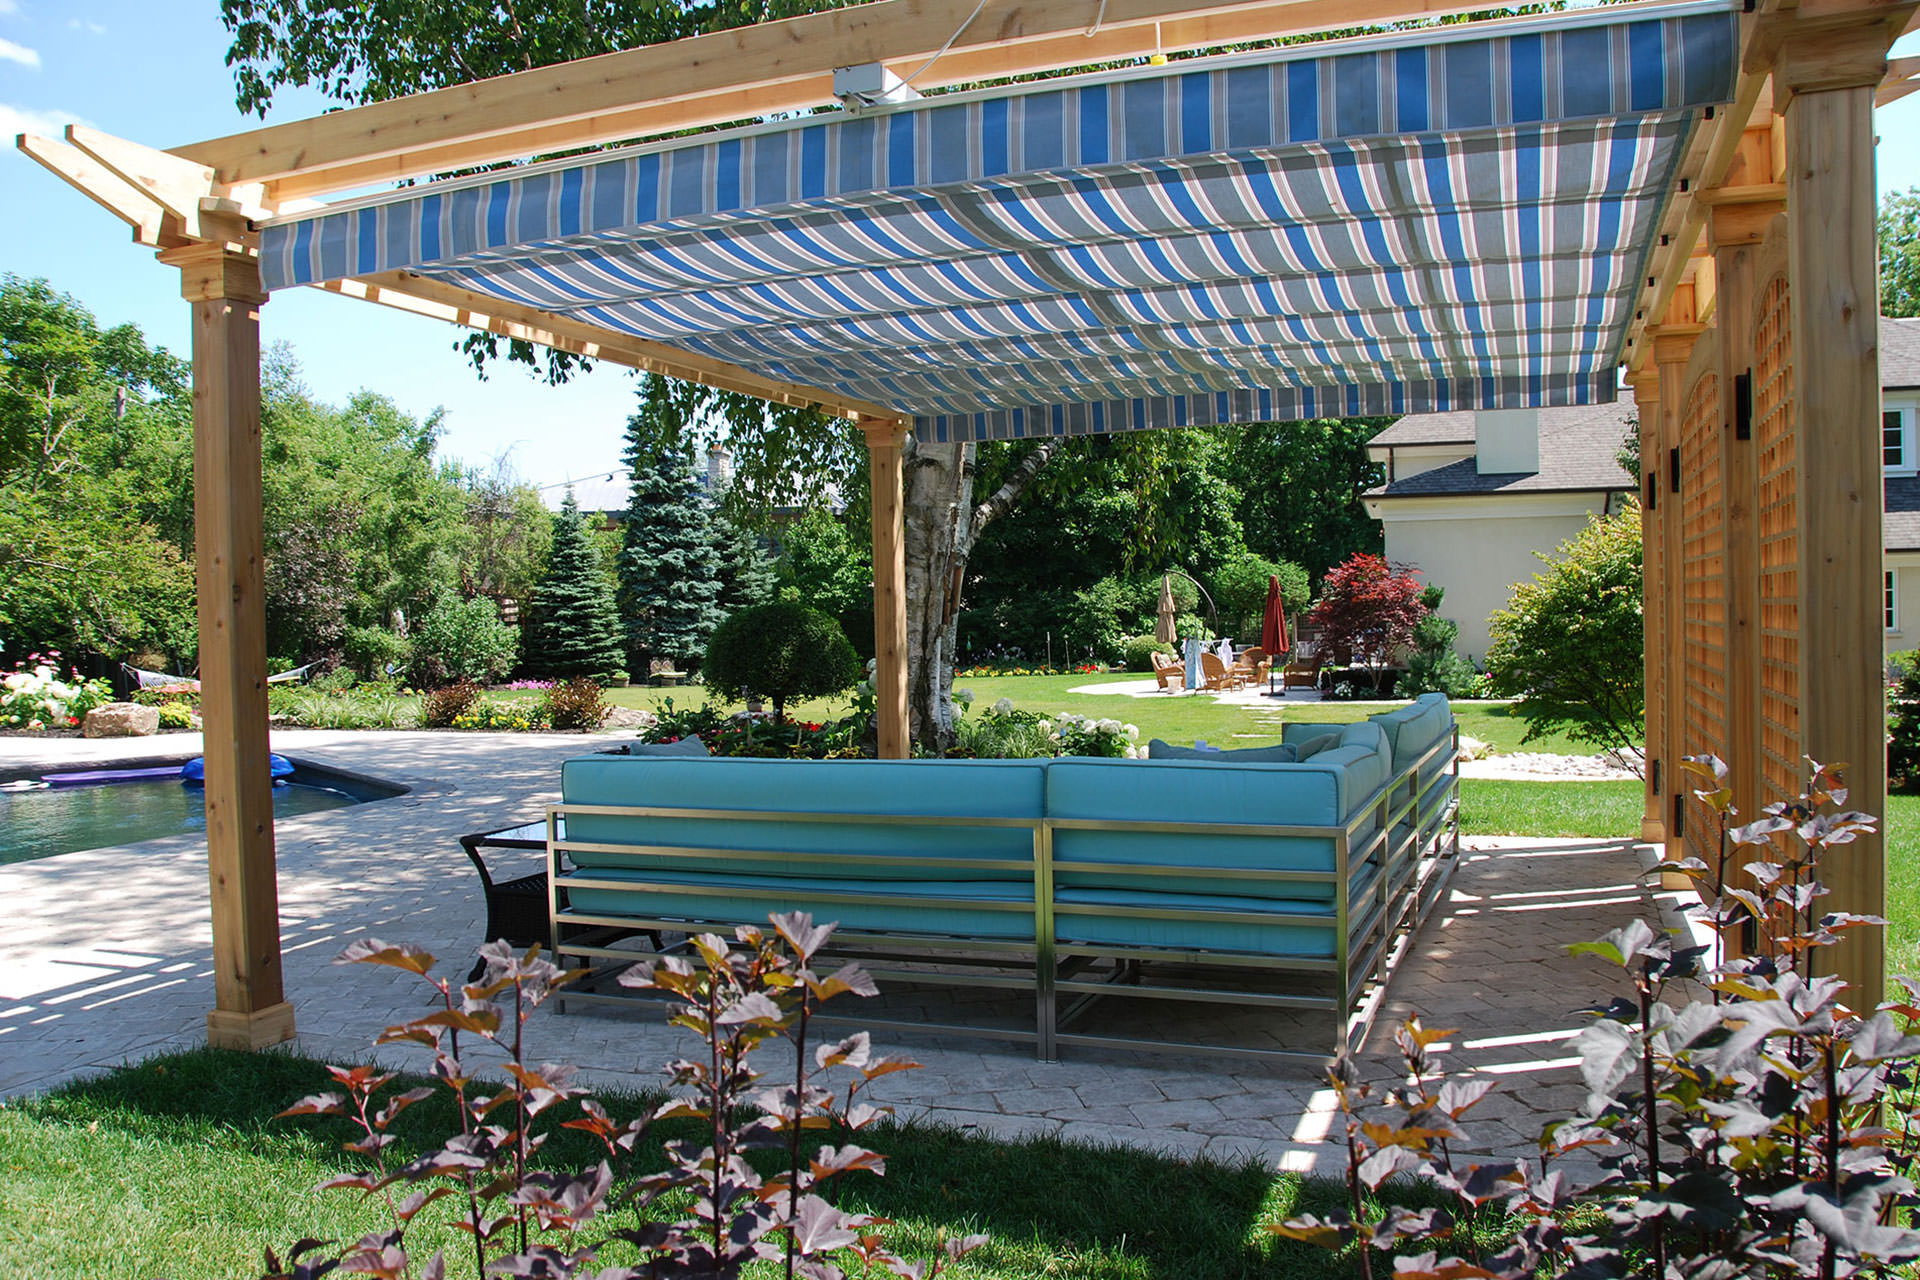 Retractable Pergola Canopy In Oakville Shadefx Canopies,How To Cut A Dragon Fruit Video